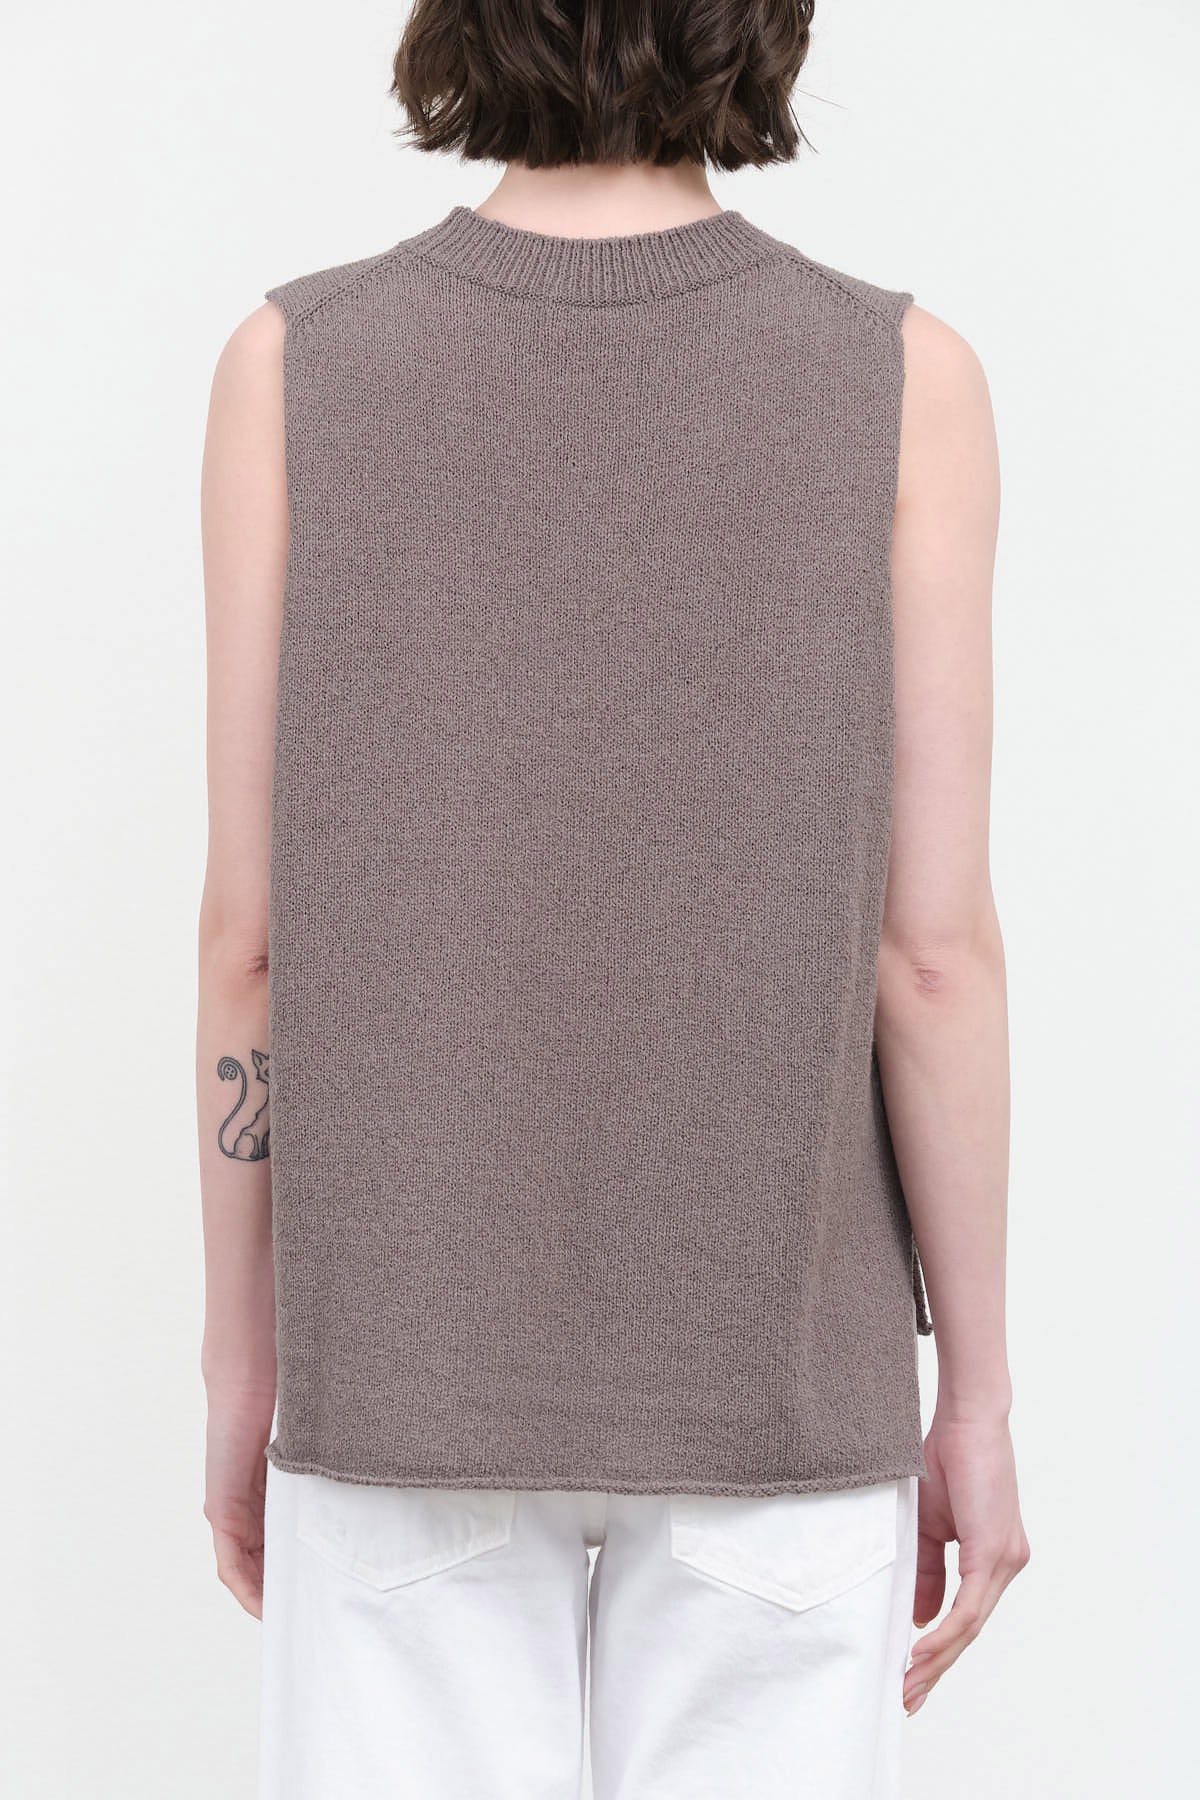 Back view of Wool Lily Vest in Otter Gray